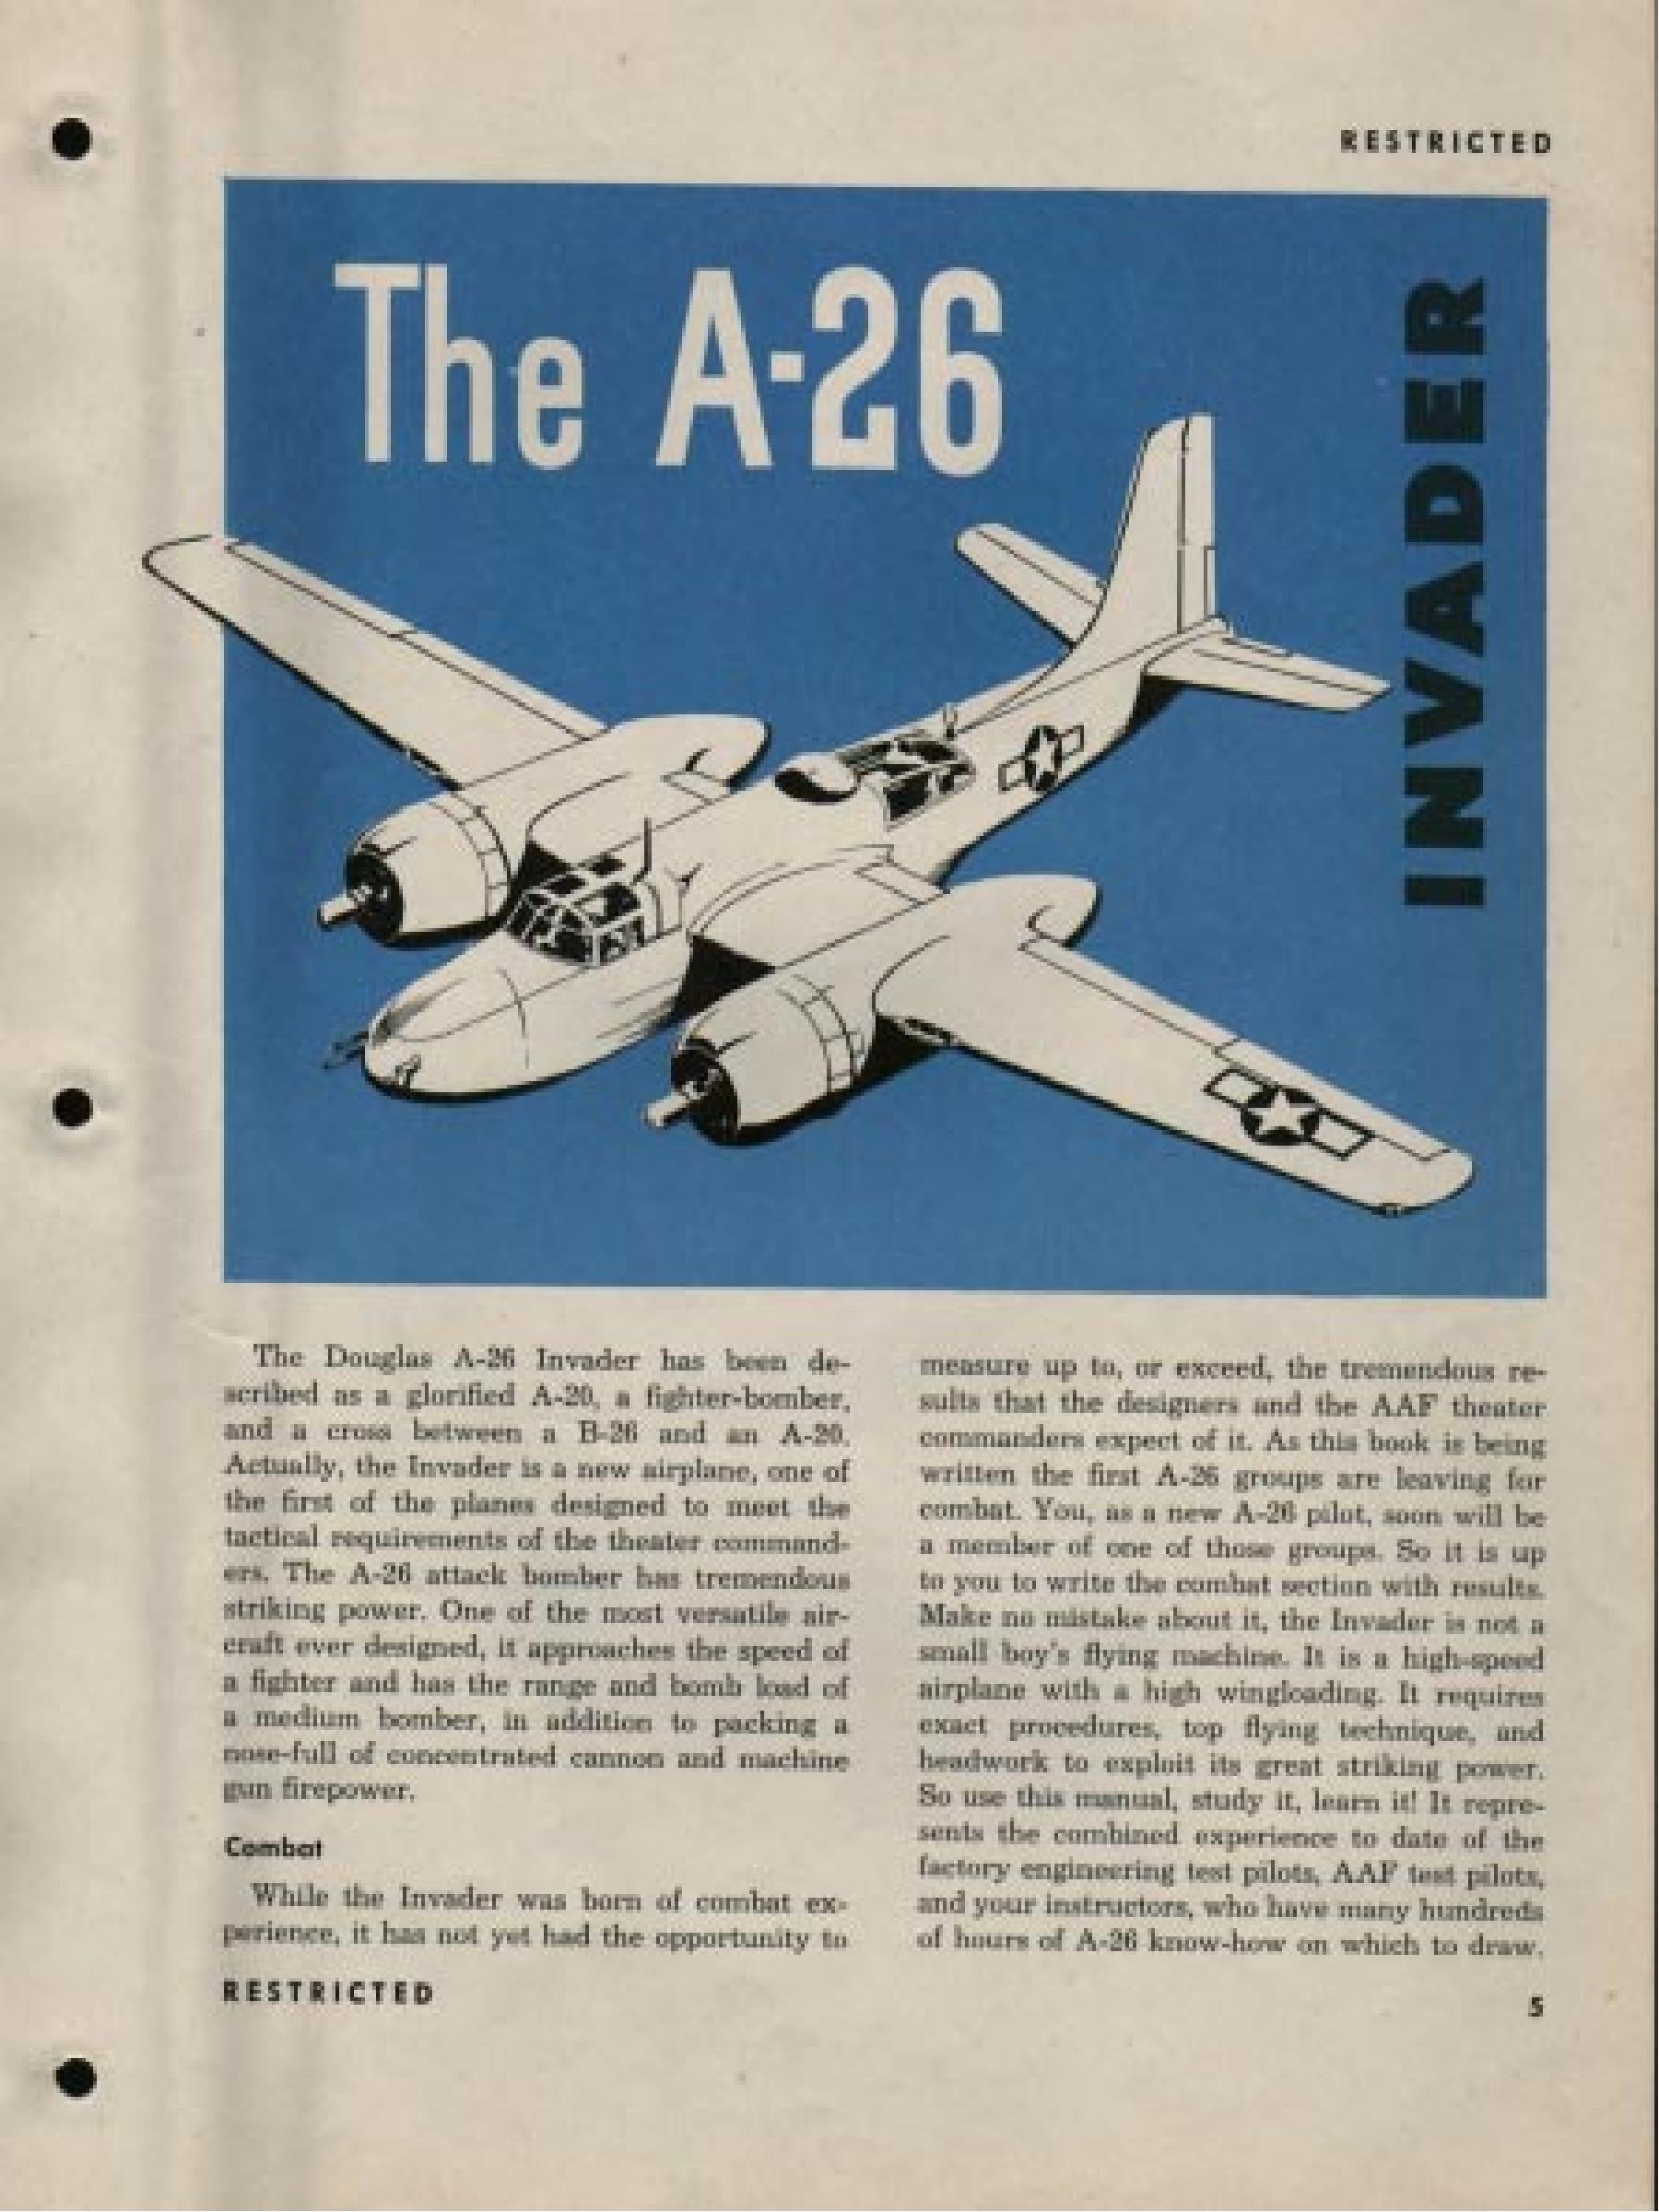 Sample page 5 from AirCorps Library document: Pilot Training Manual for the A-26 Invader